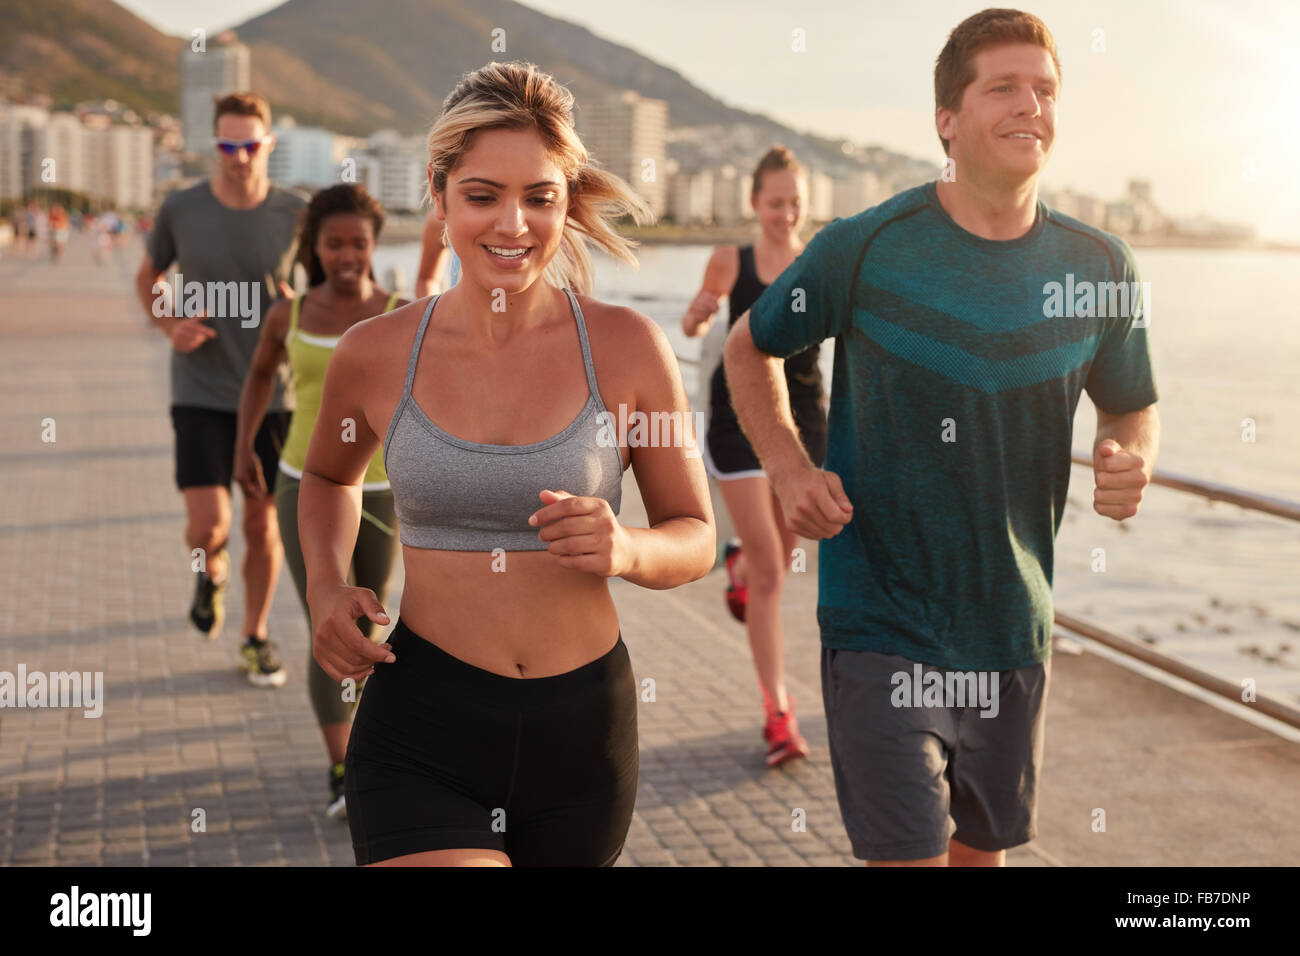 Portrait of fit young woman running with friends on street along the sea. Running club group training outdoors. Stock Photo